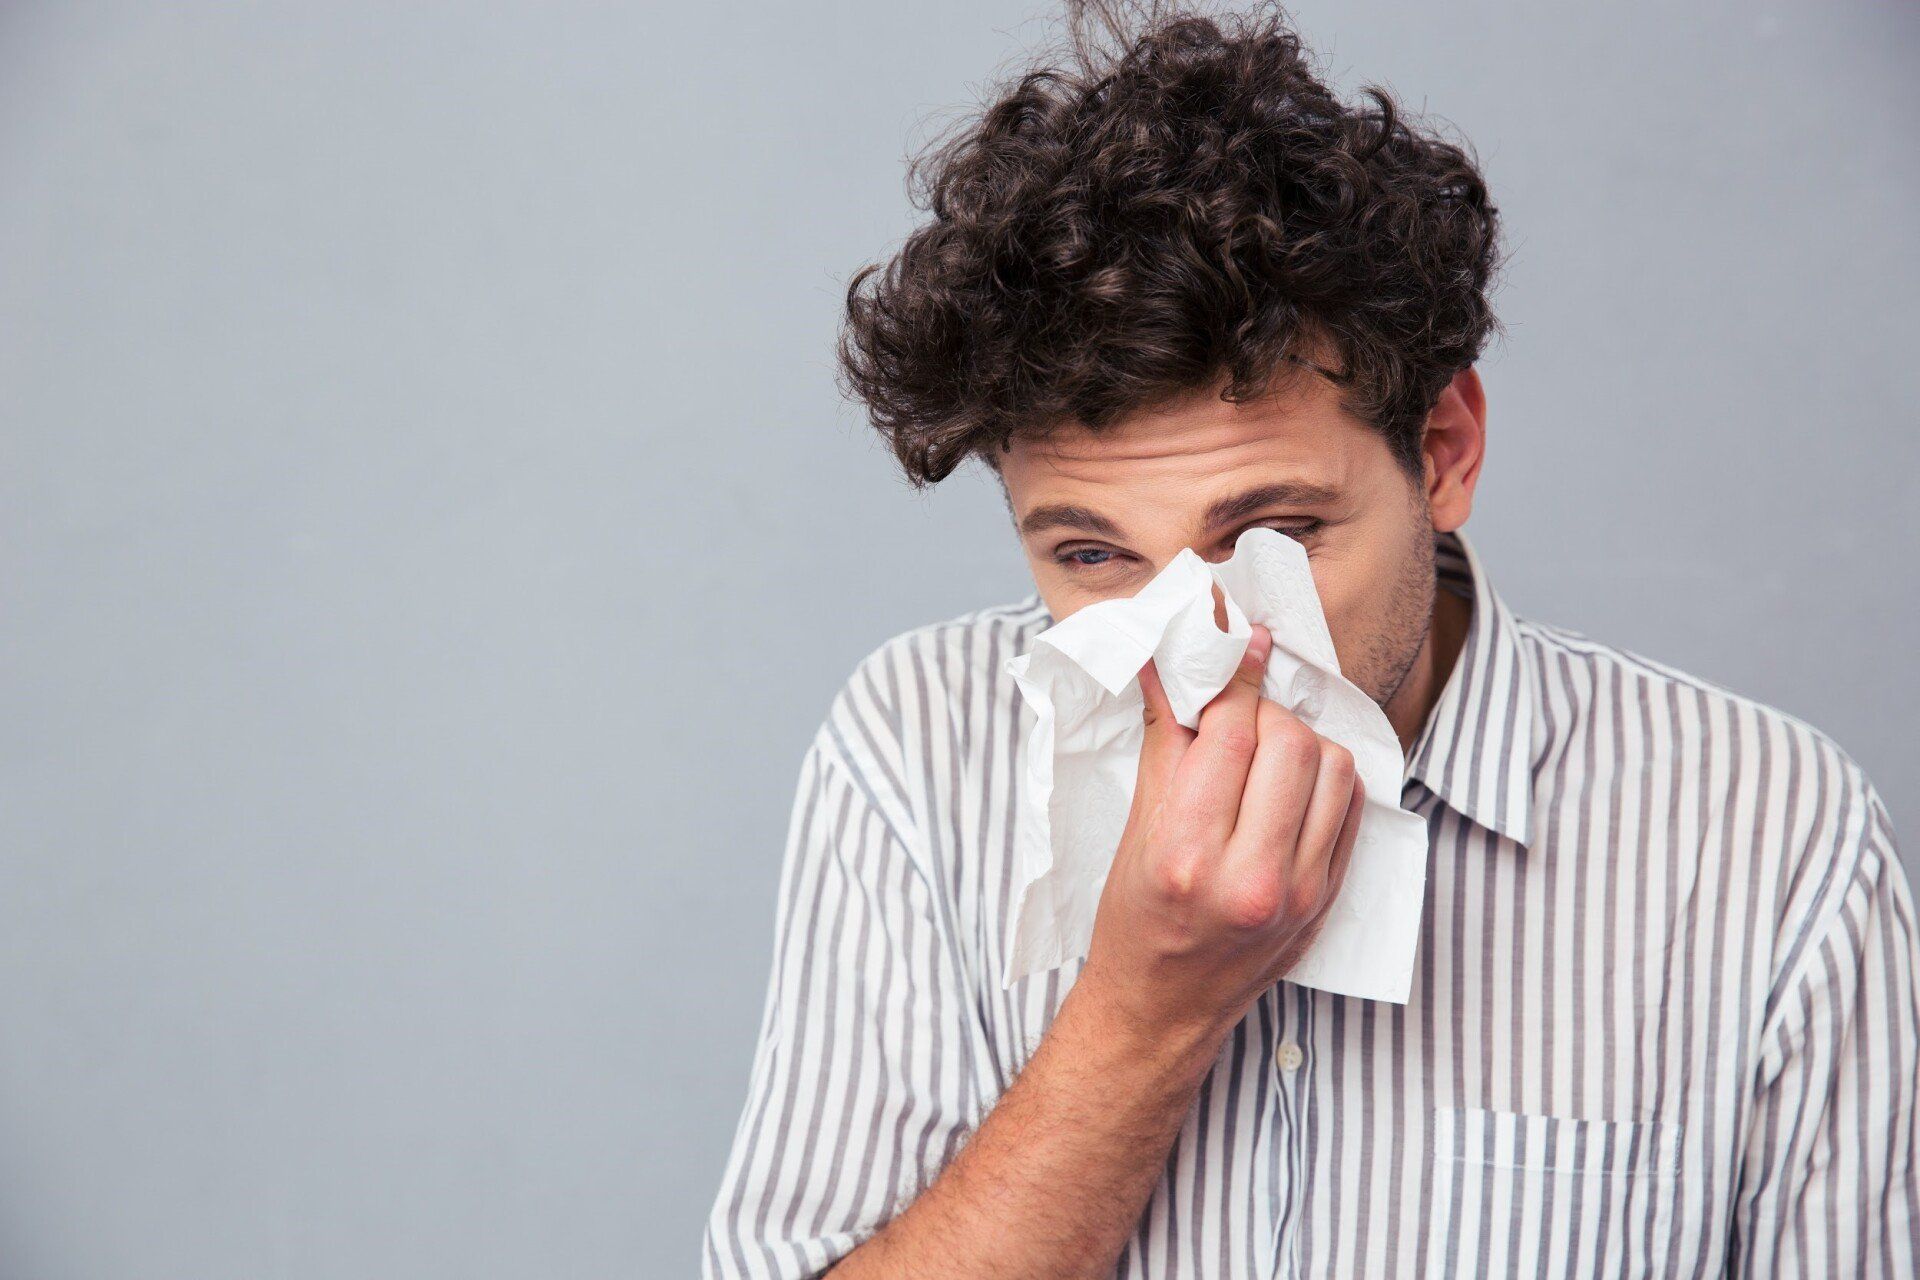 Man having nasal problems blowing his nose on a tissue